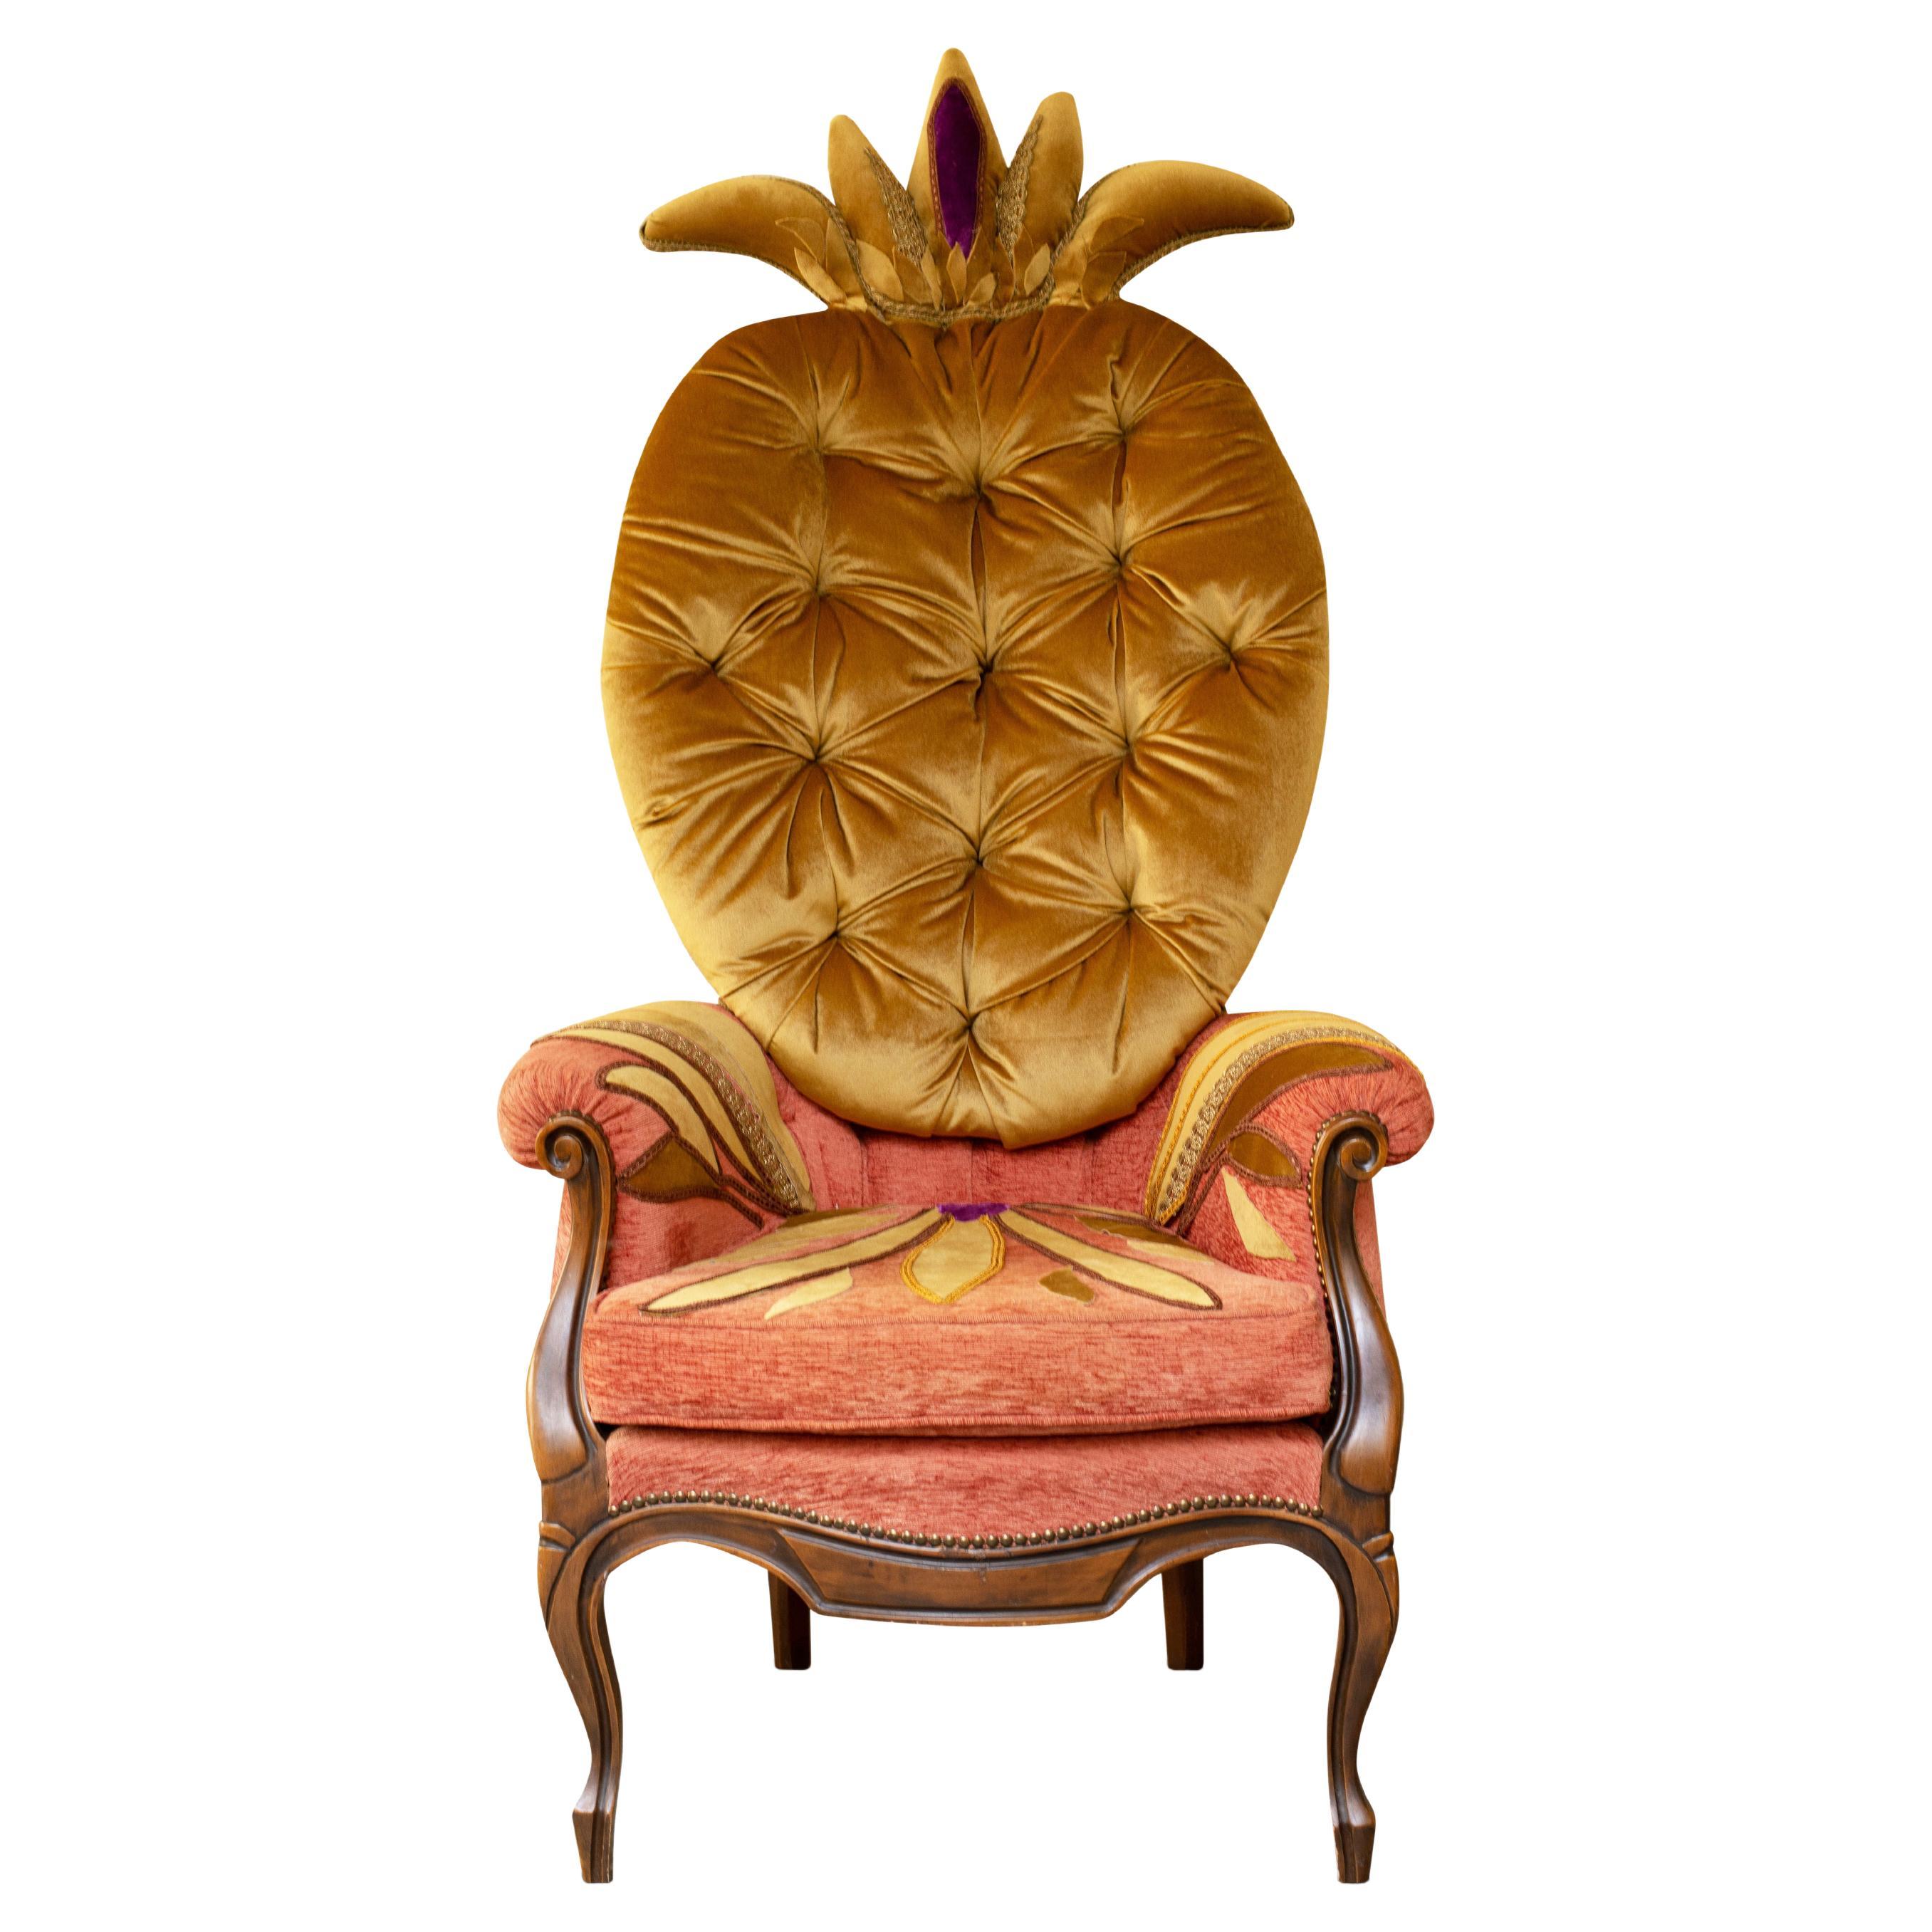 Contemporary Art Armchair - Yellow Pineapple by Carla Tolomeo